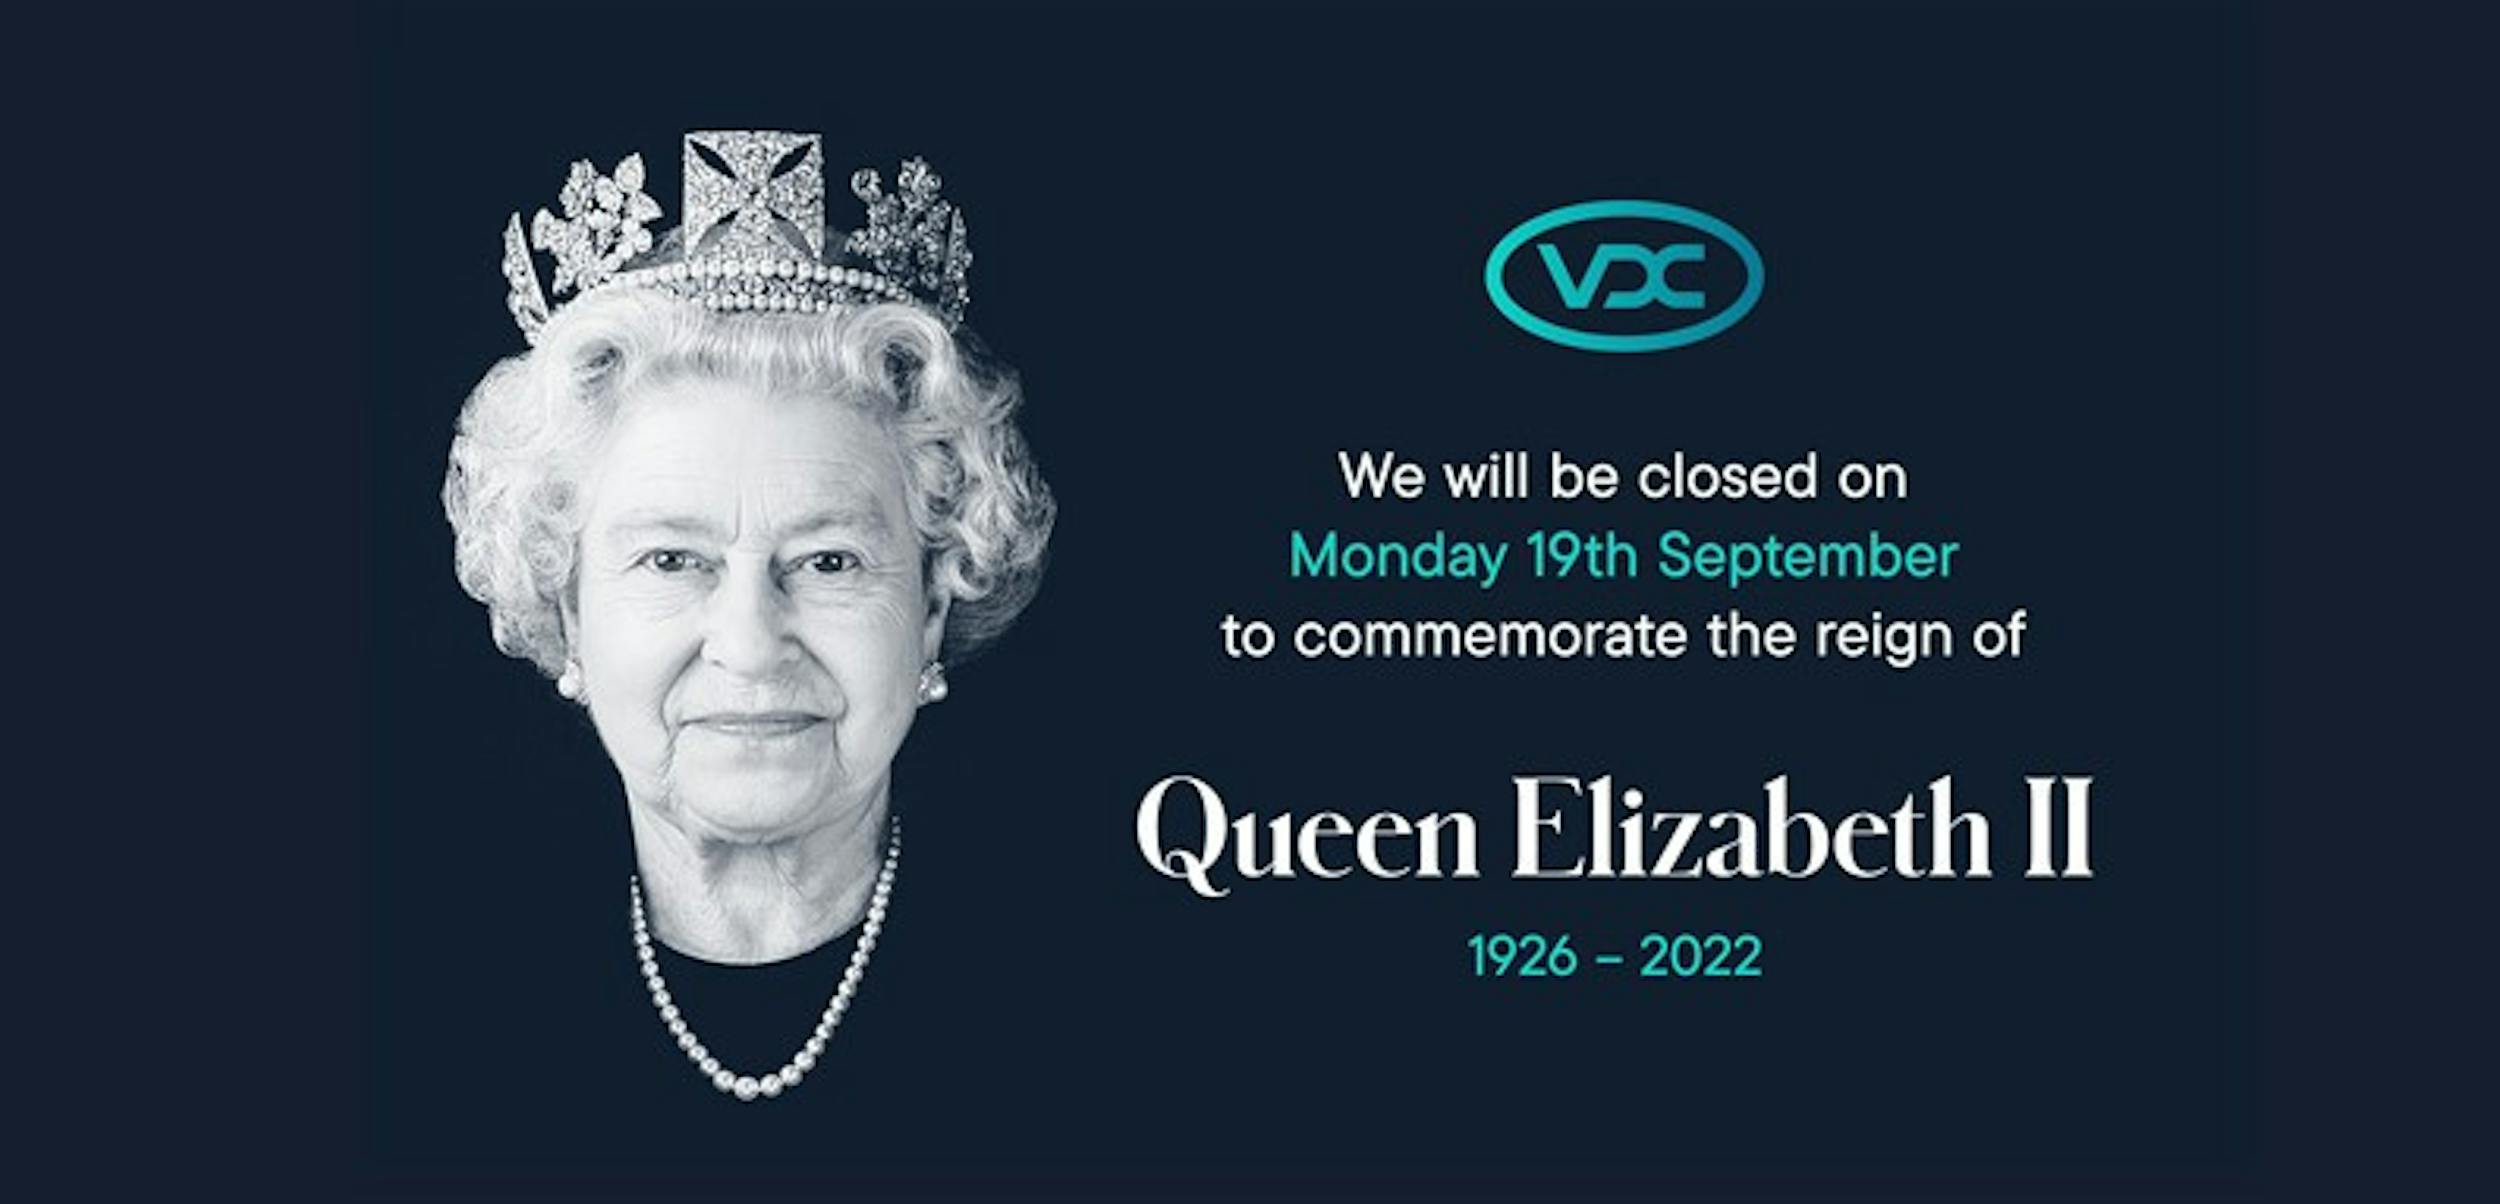 Closed on Monday 19th September to commemorate the reign of Queen Elizabeth II (1926 - 2022)